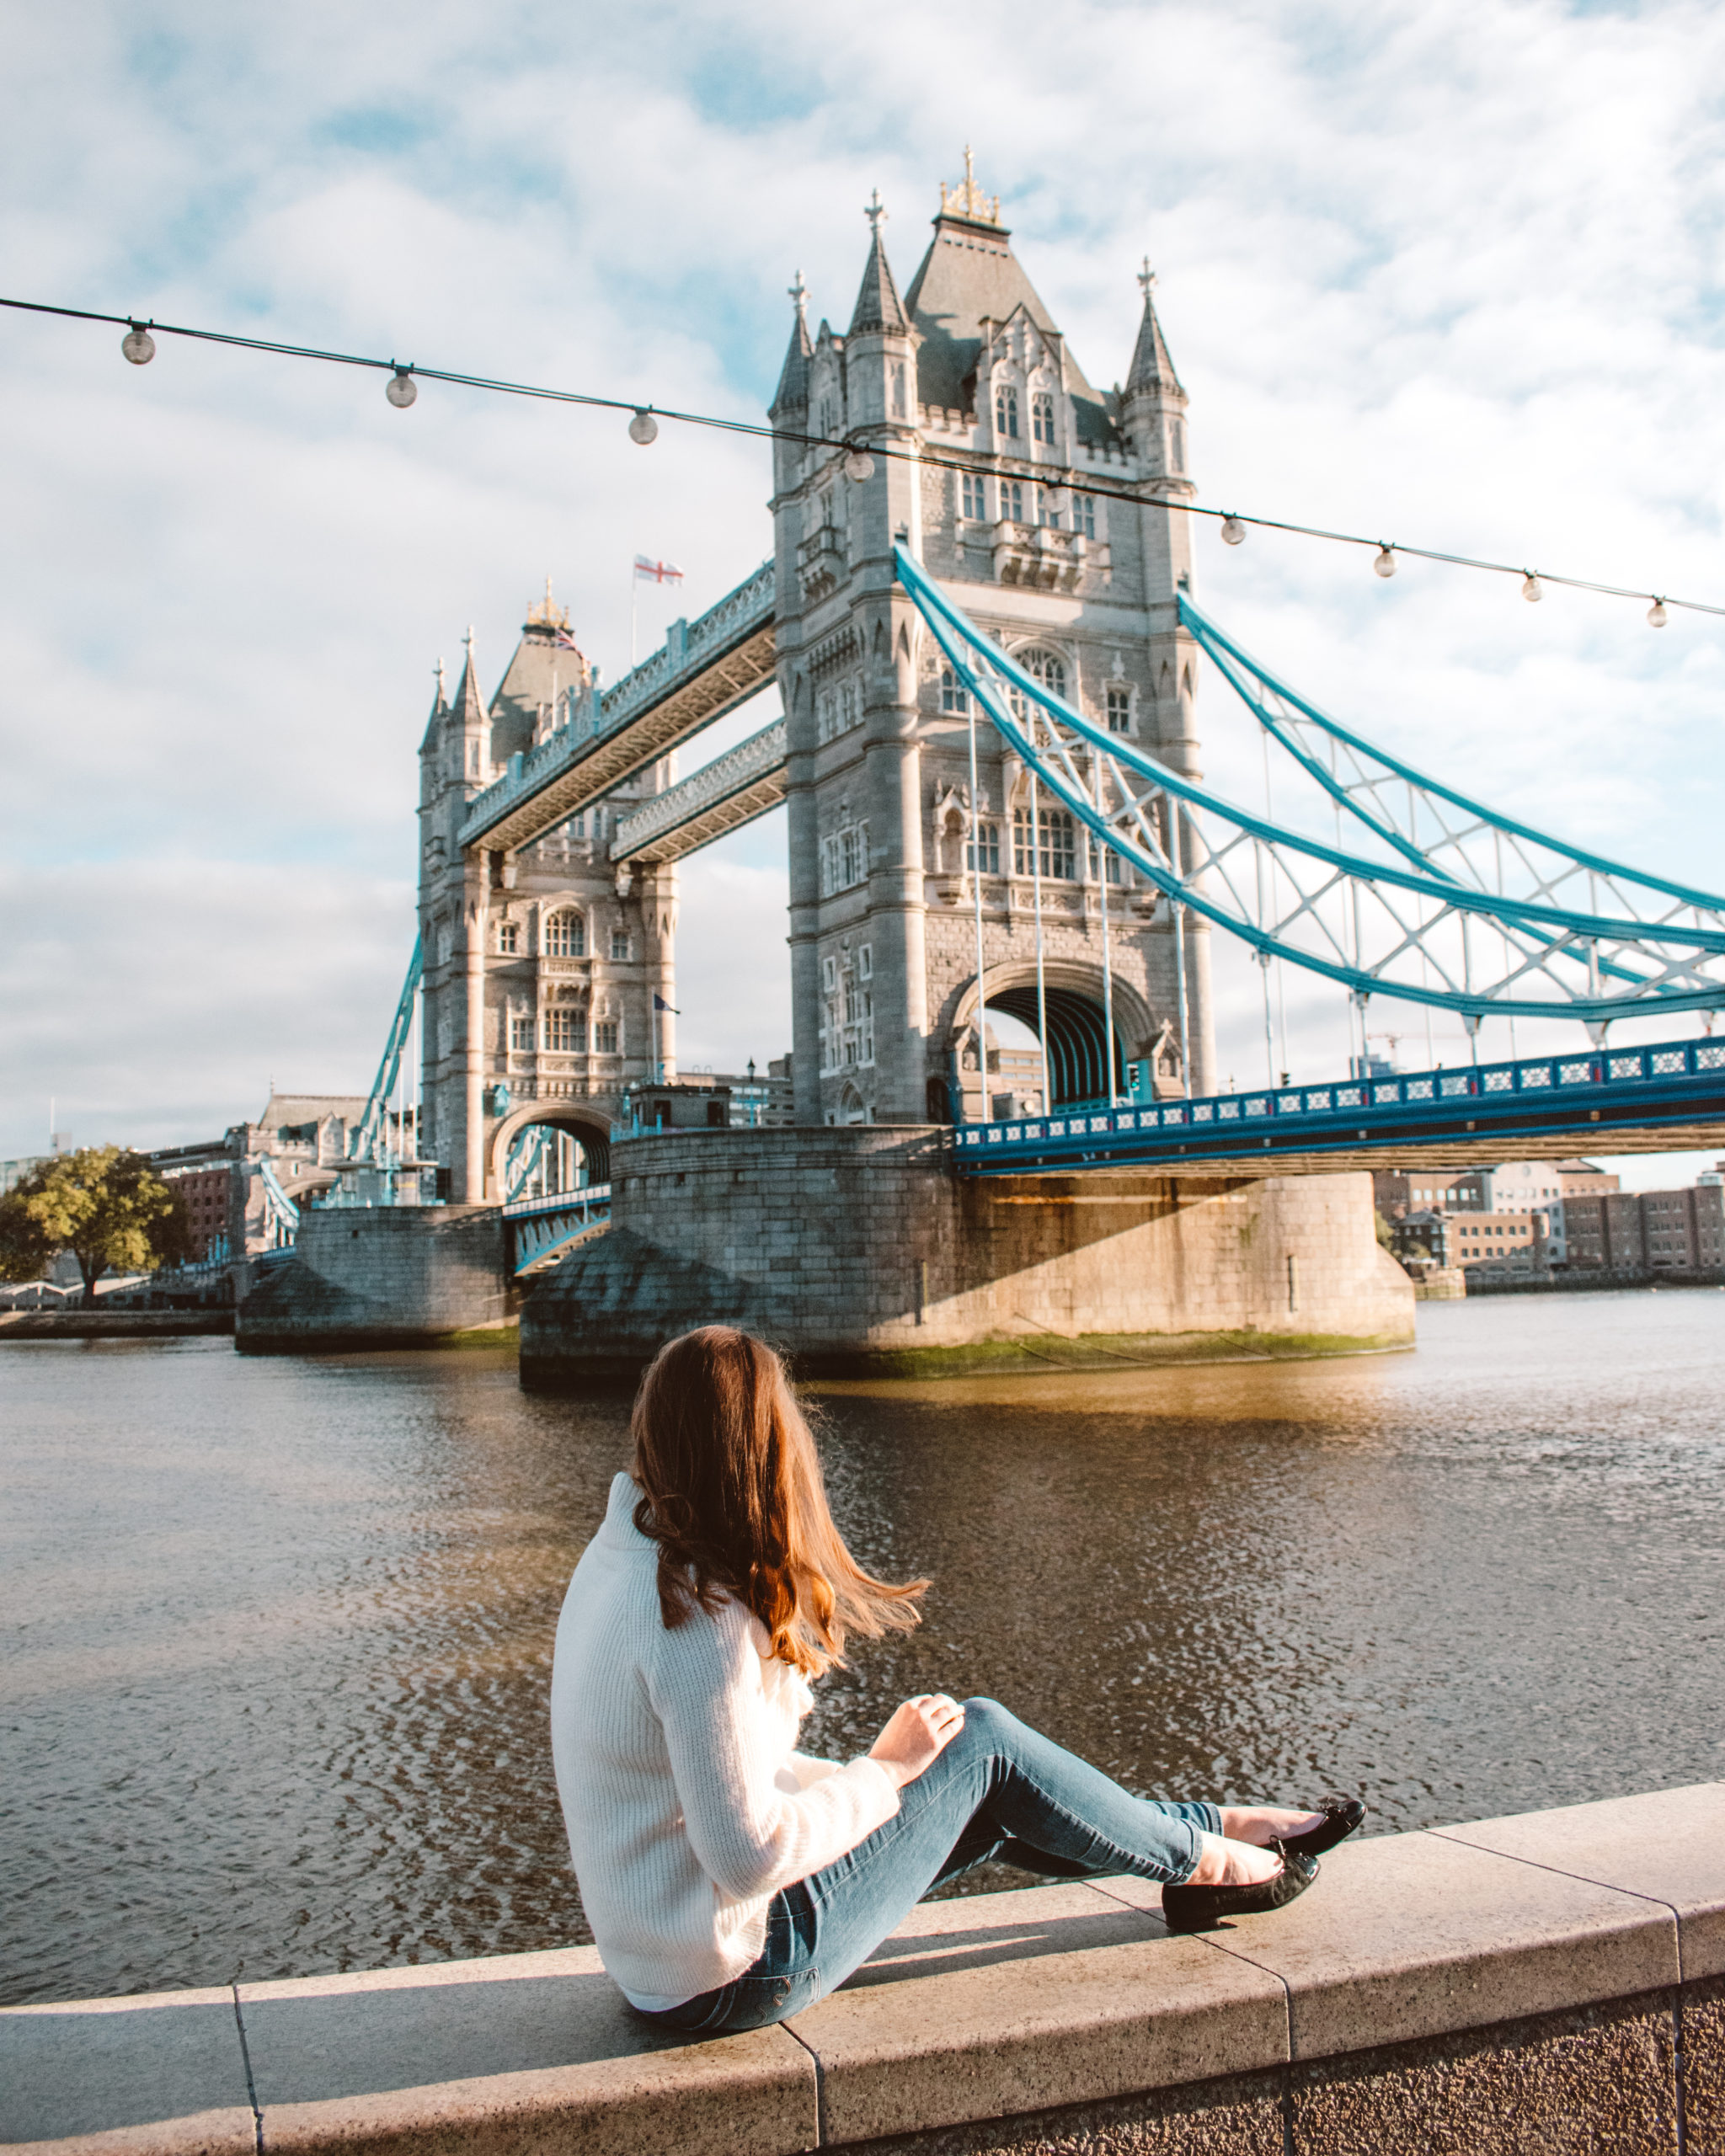 A LOCAL’S GUIDE TO LONDON FOR FIRST TIMERS